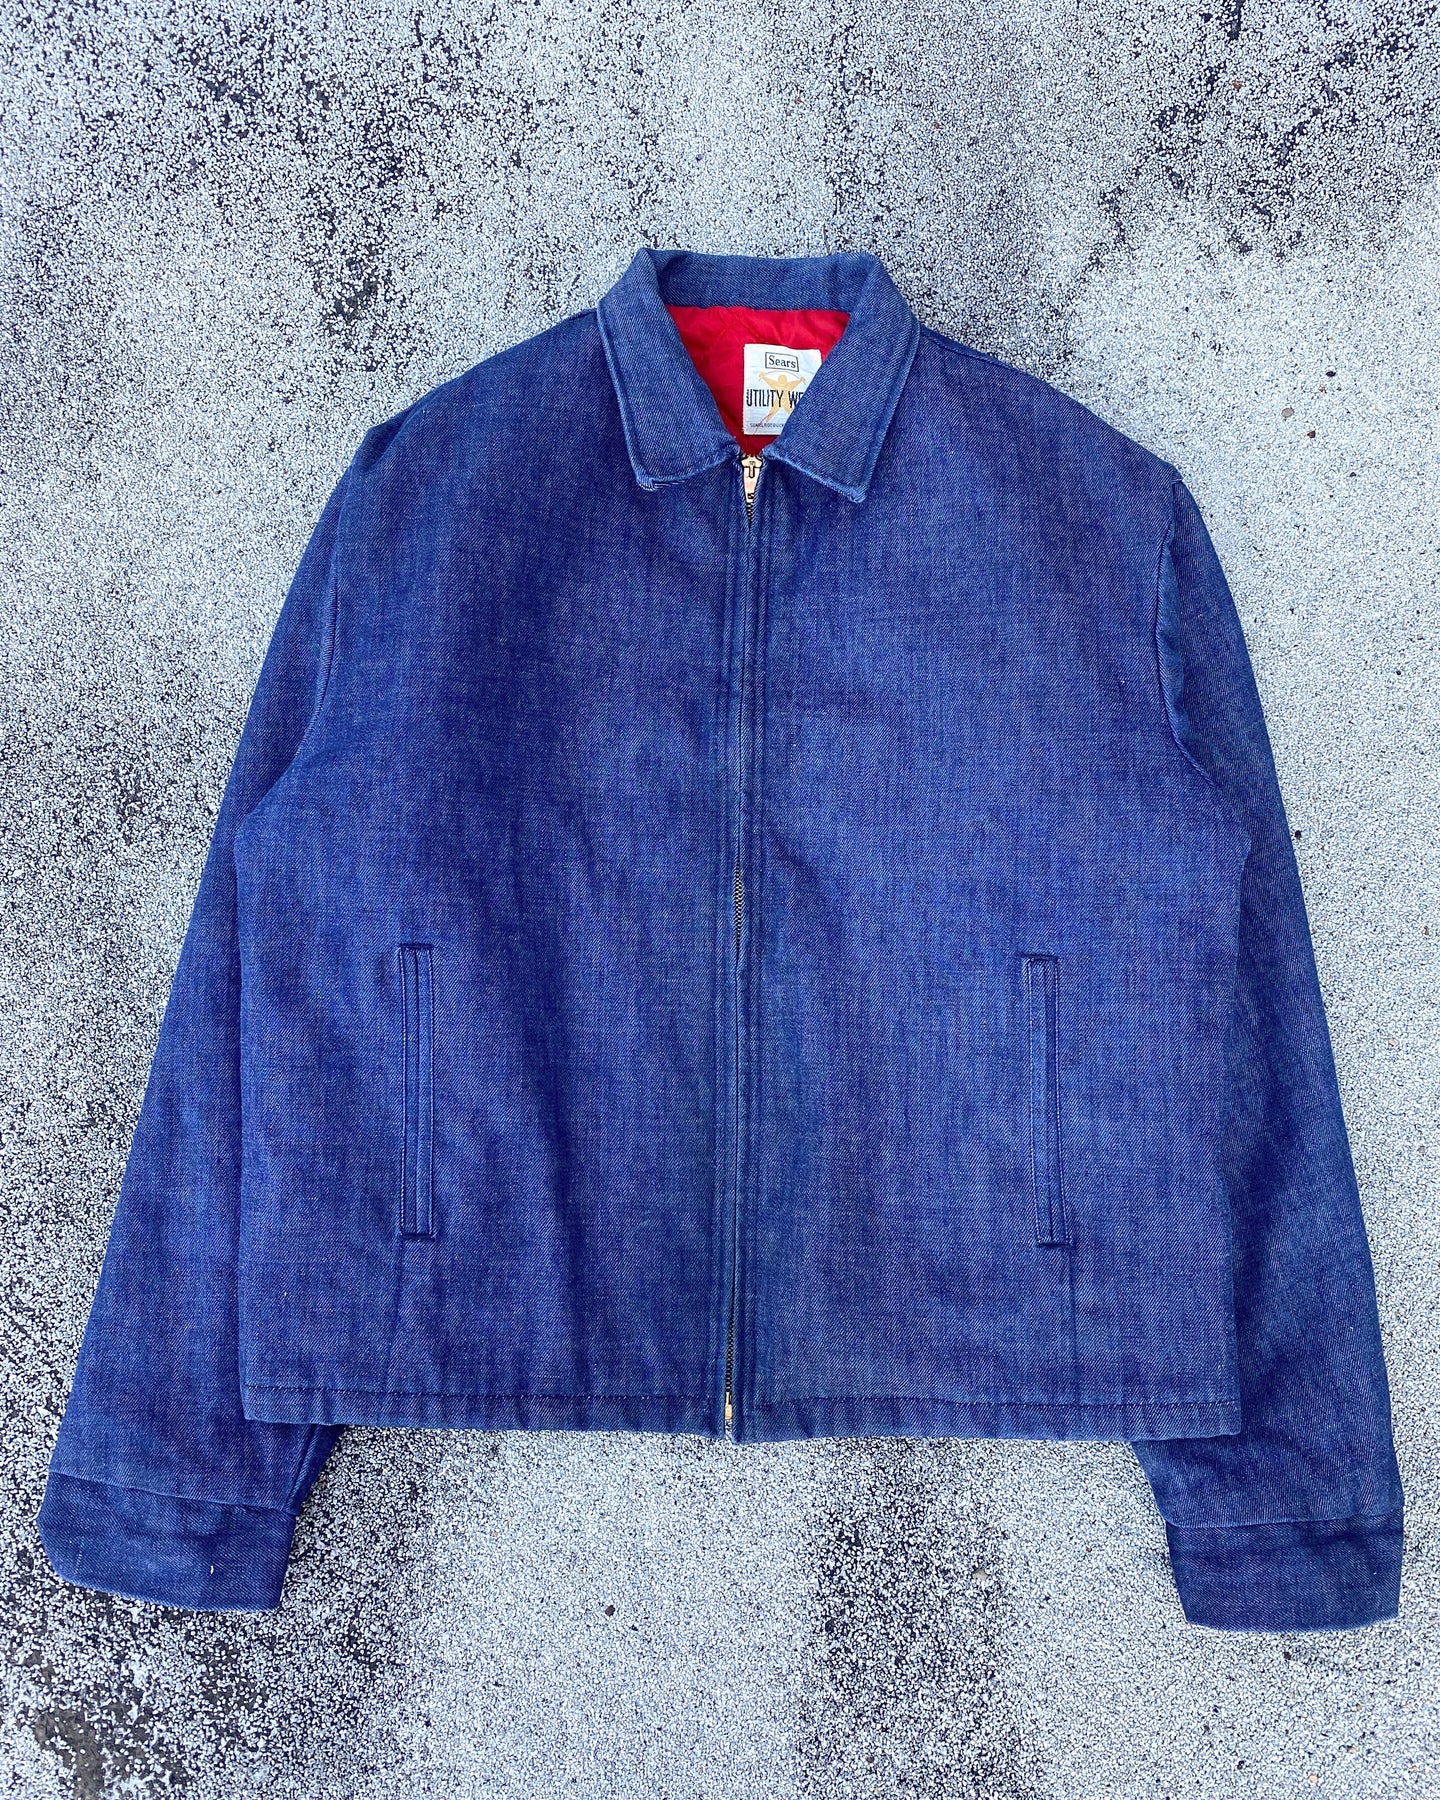 1970s Sears Quilted Denim Work Jacket - Size Large